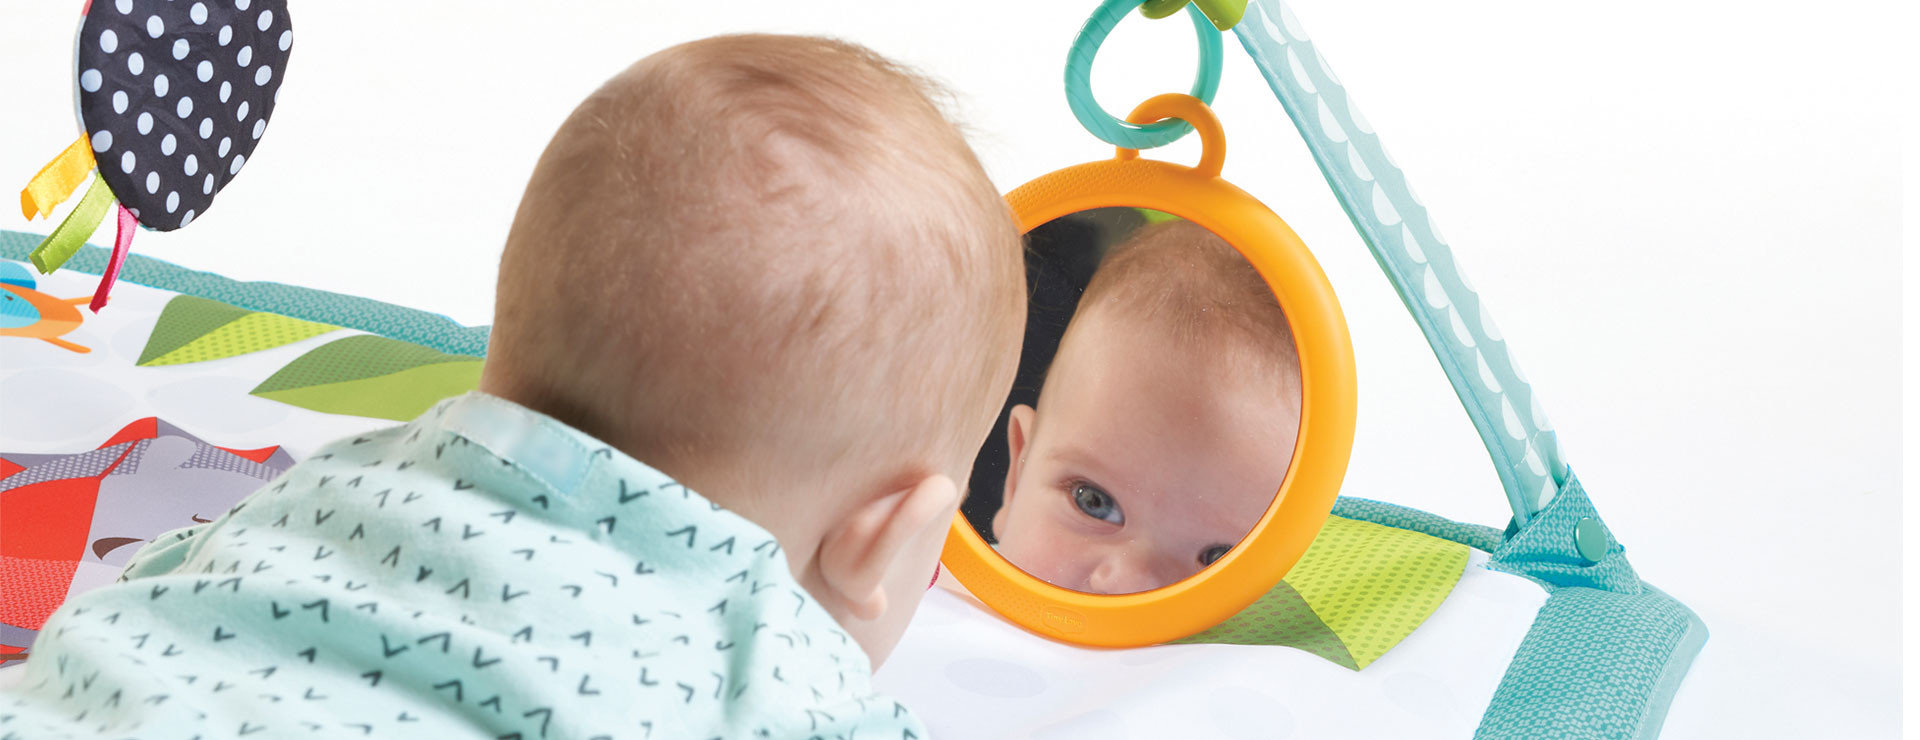 Comfortable mat and engaging mirror promote extended tummy time